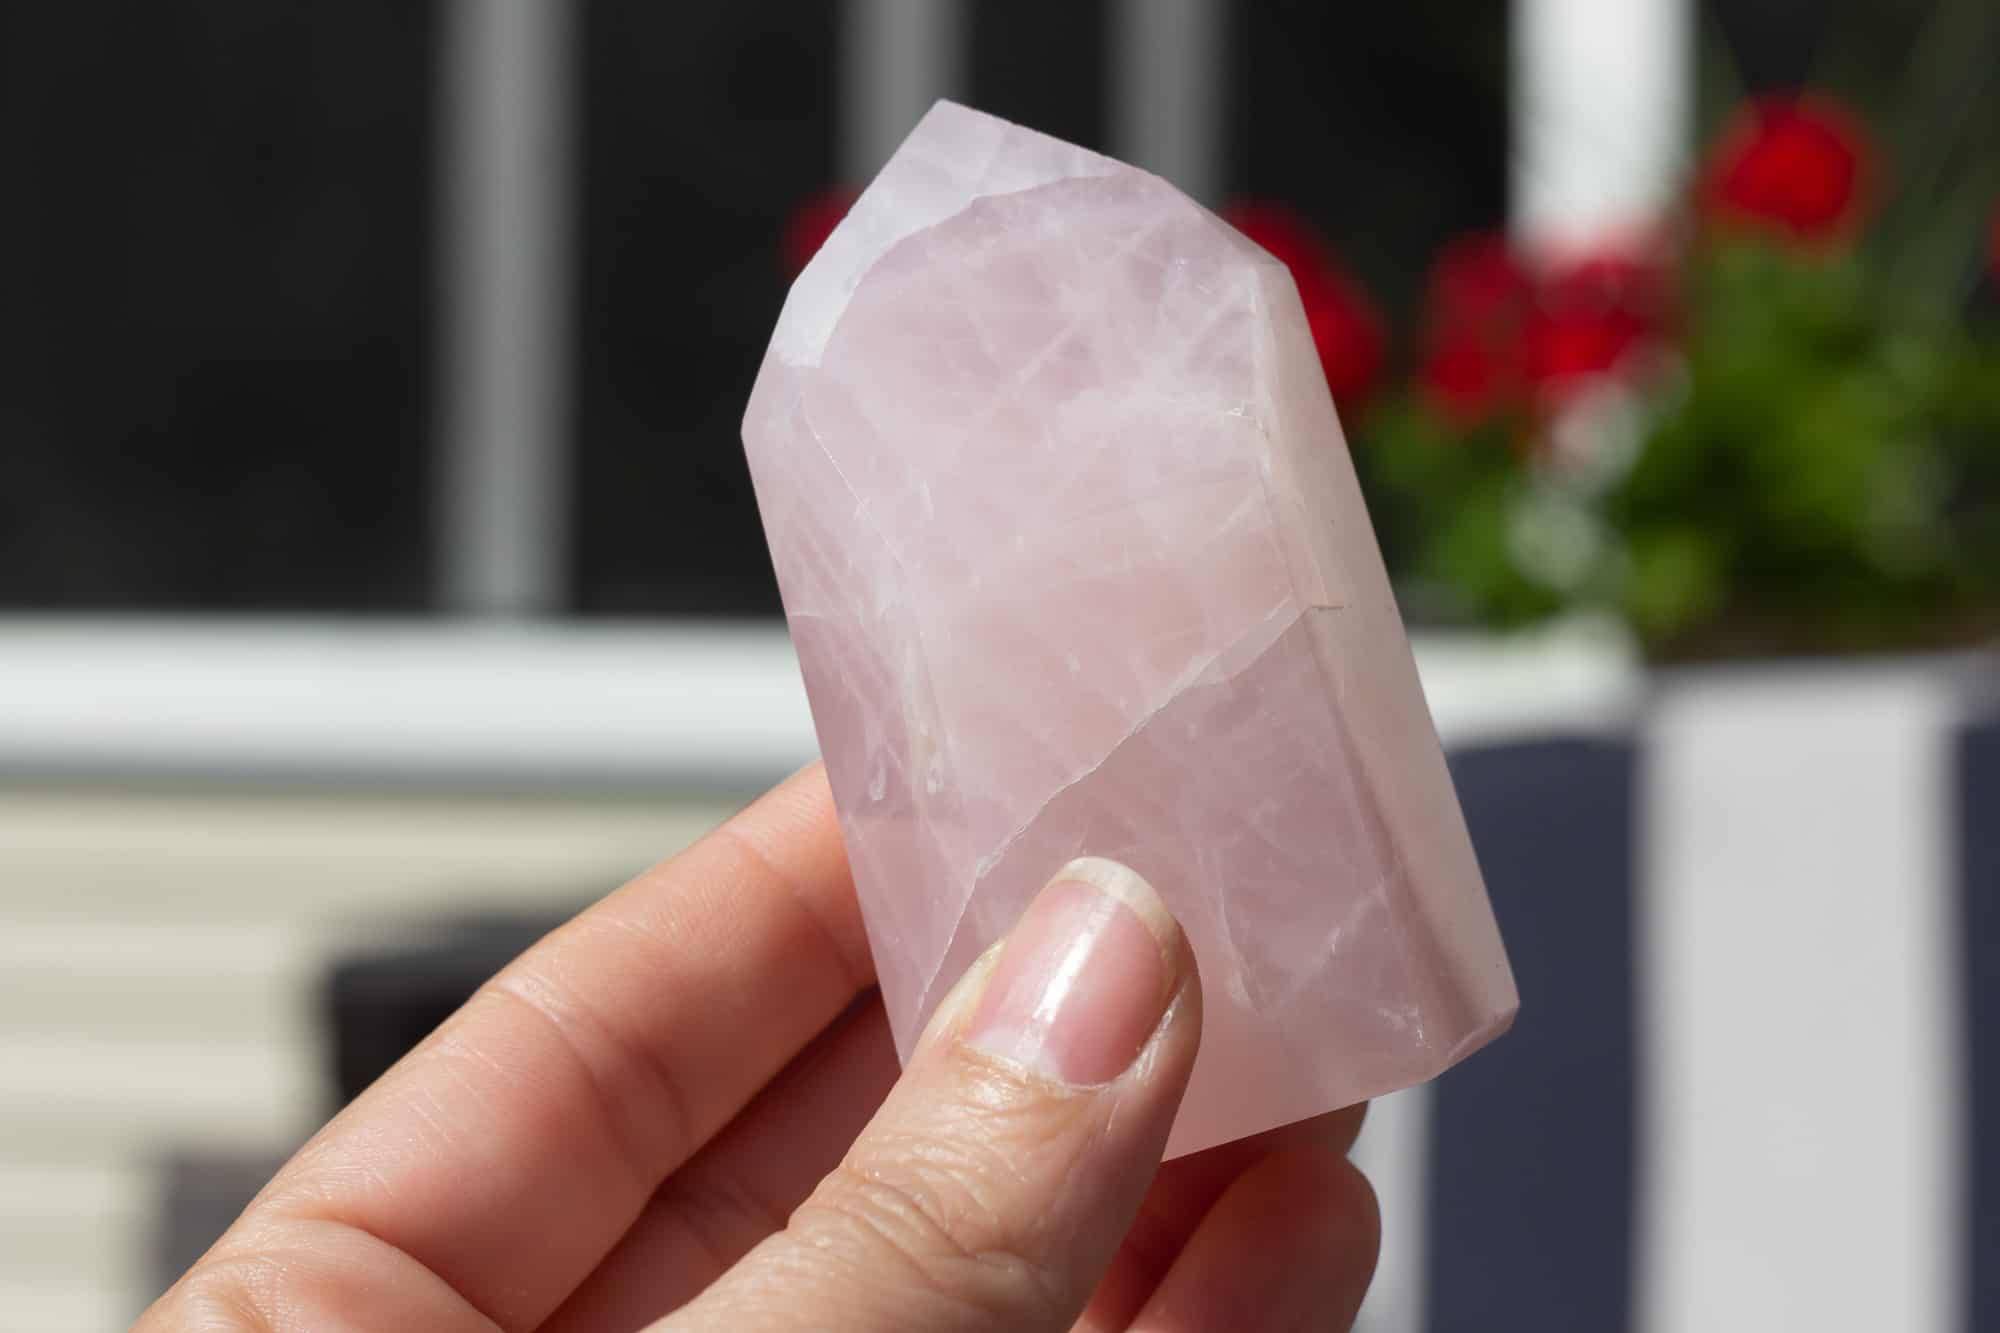 A rose quartz tower being held up.